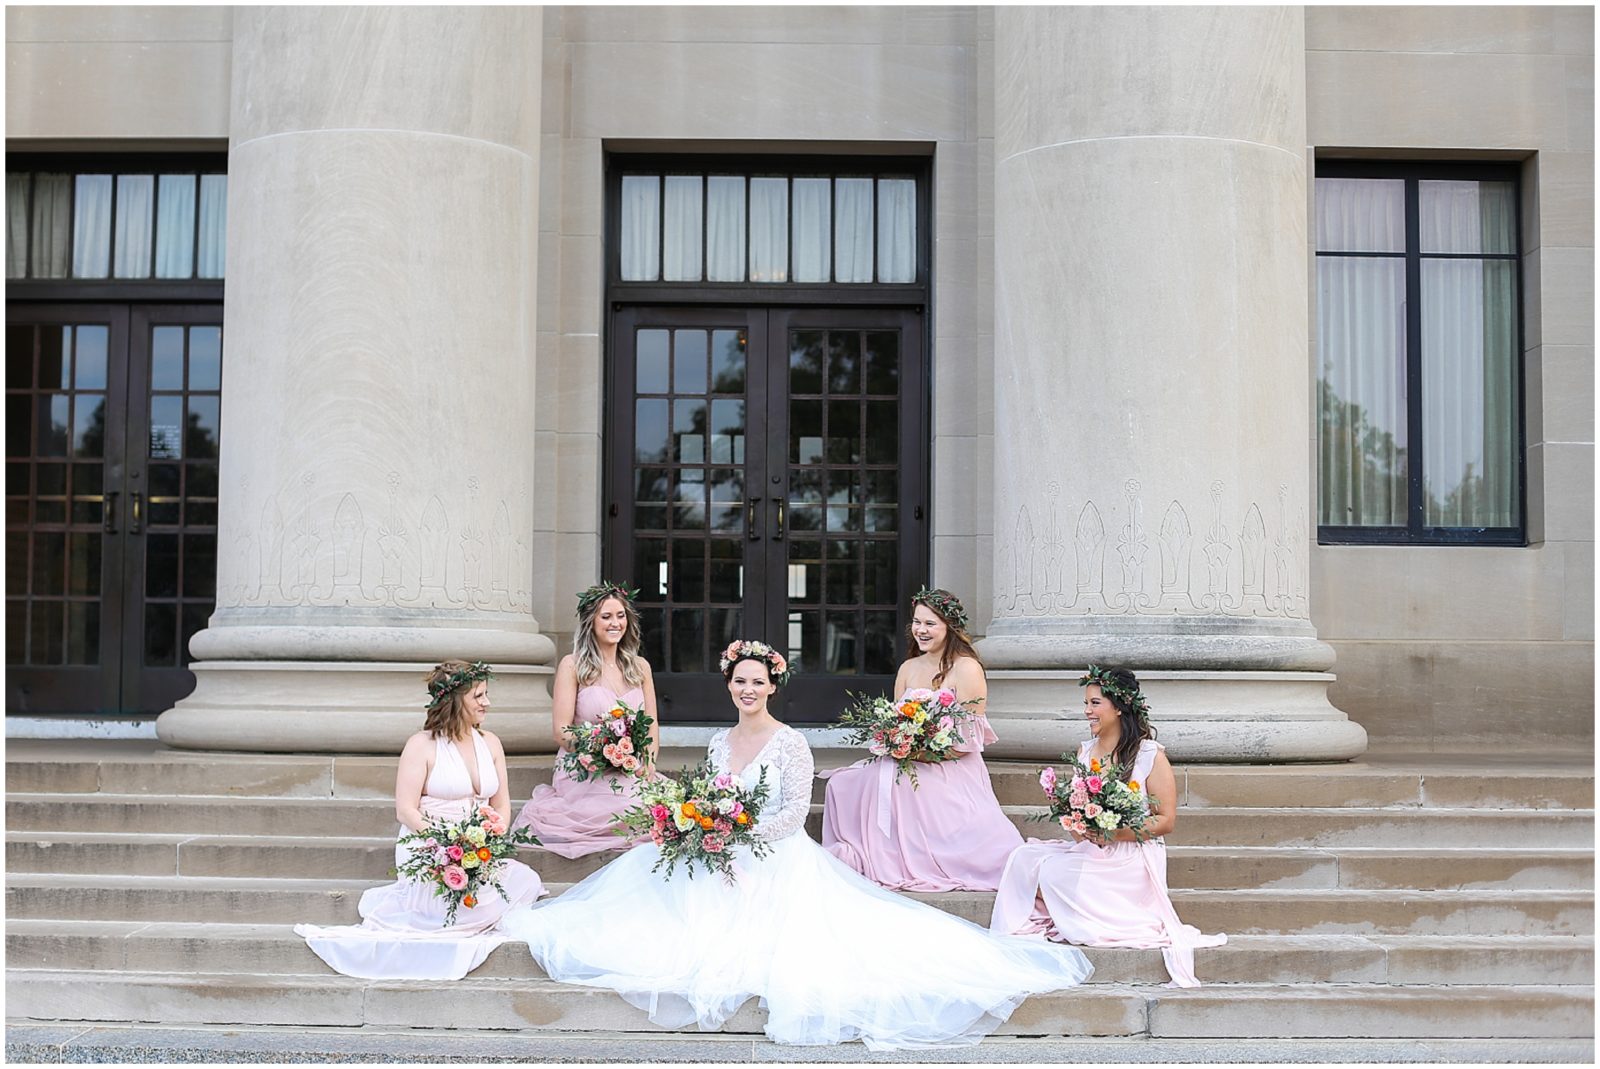 bridal make up by hello lovely kc in kansas city at nelson atkins museum kc wedding photography